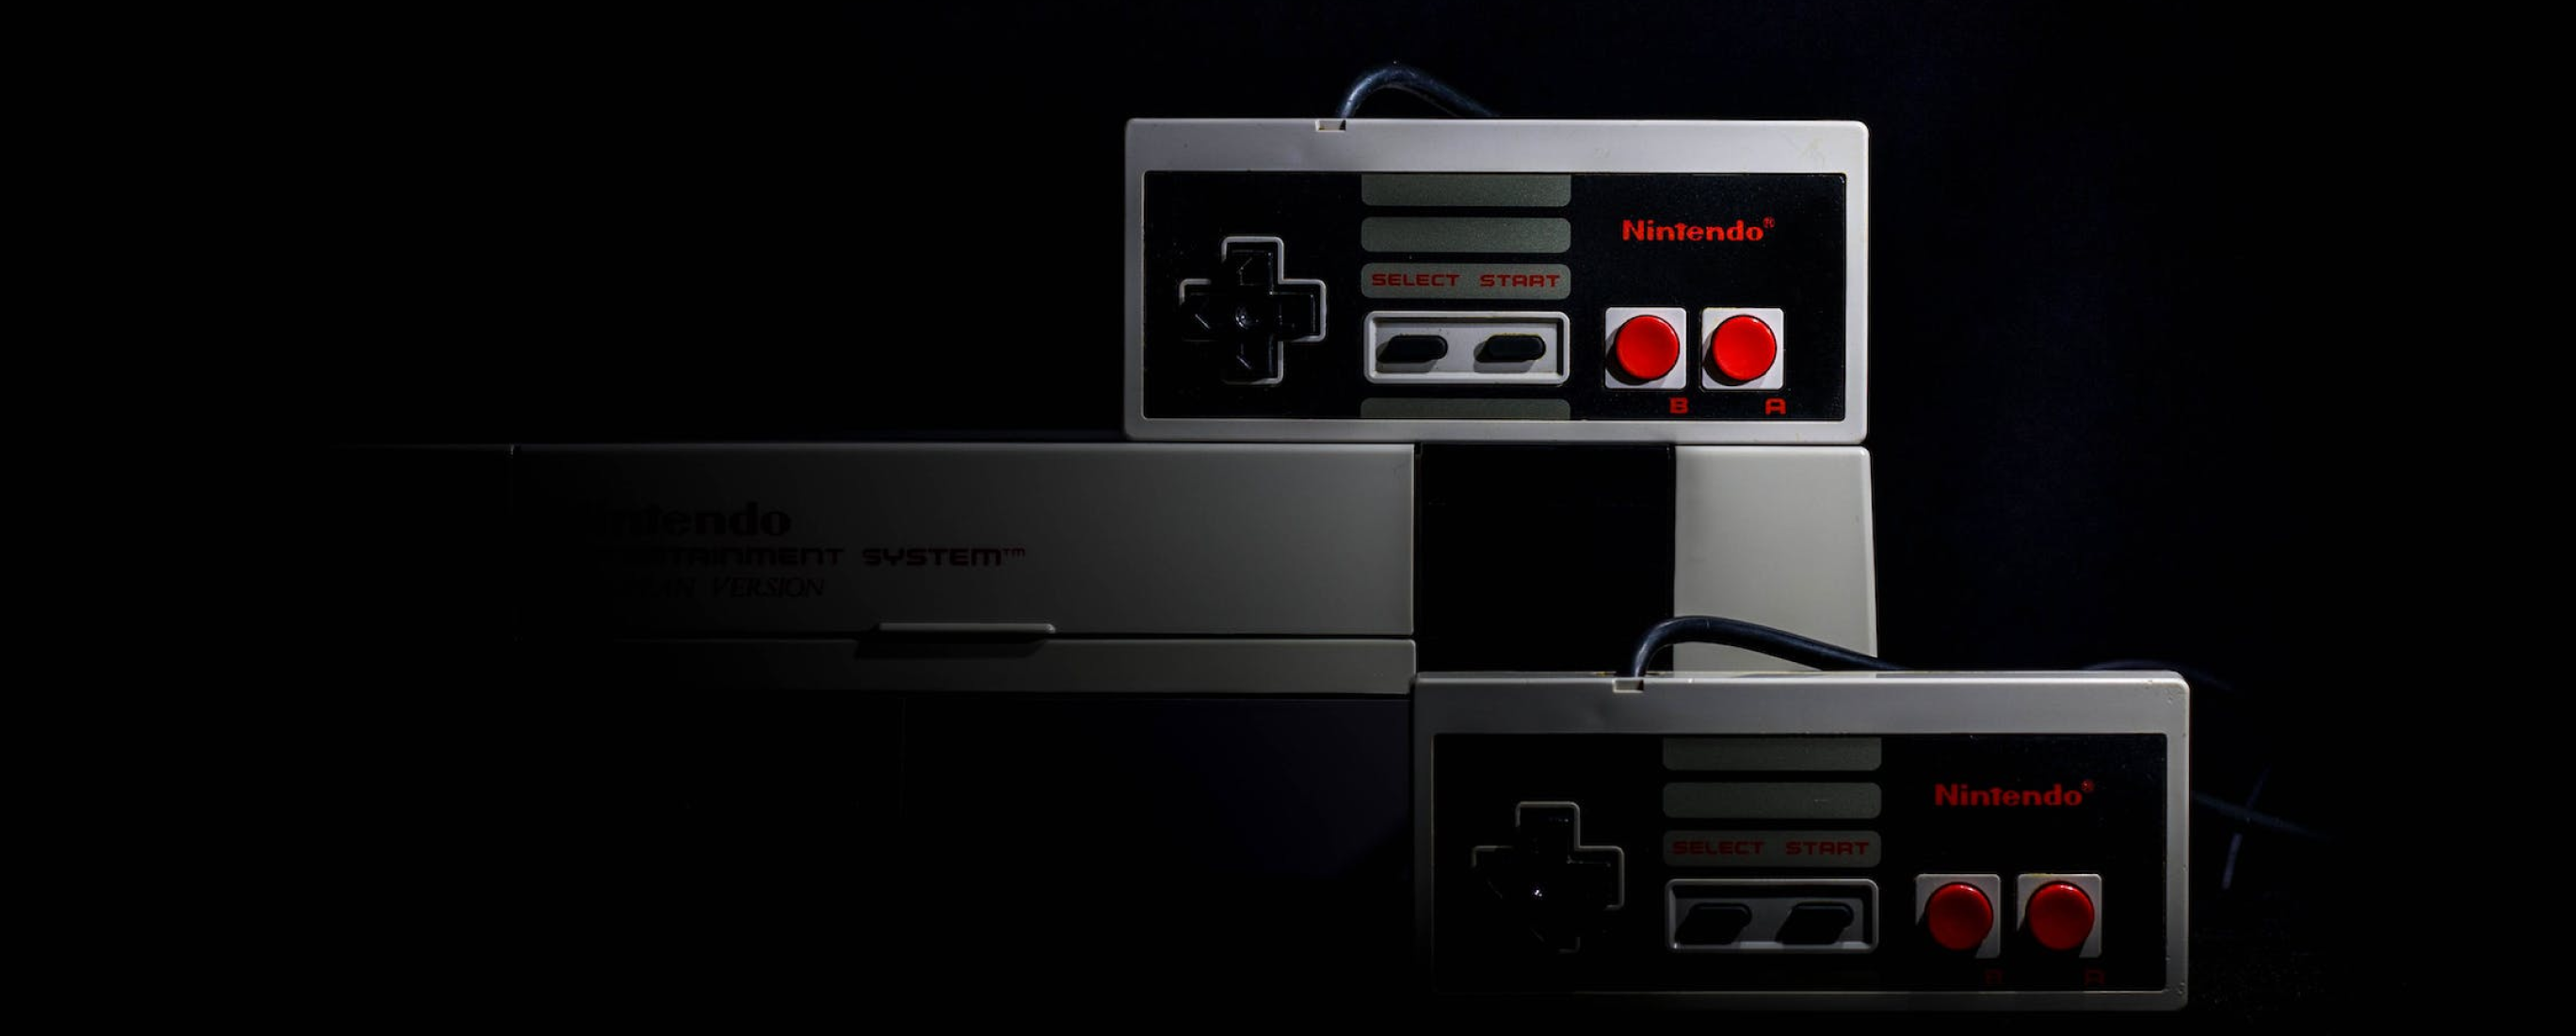 The original Nintendo Entertainment System (NES) captured with two controllers and the console in a dark setting.